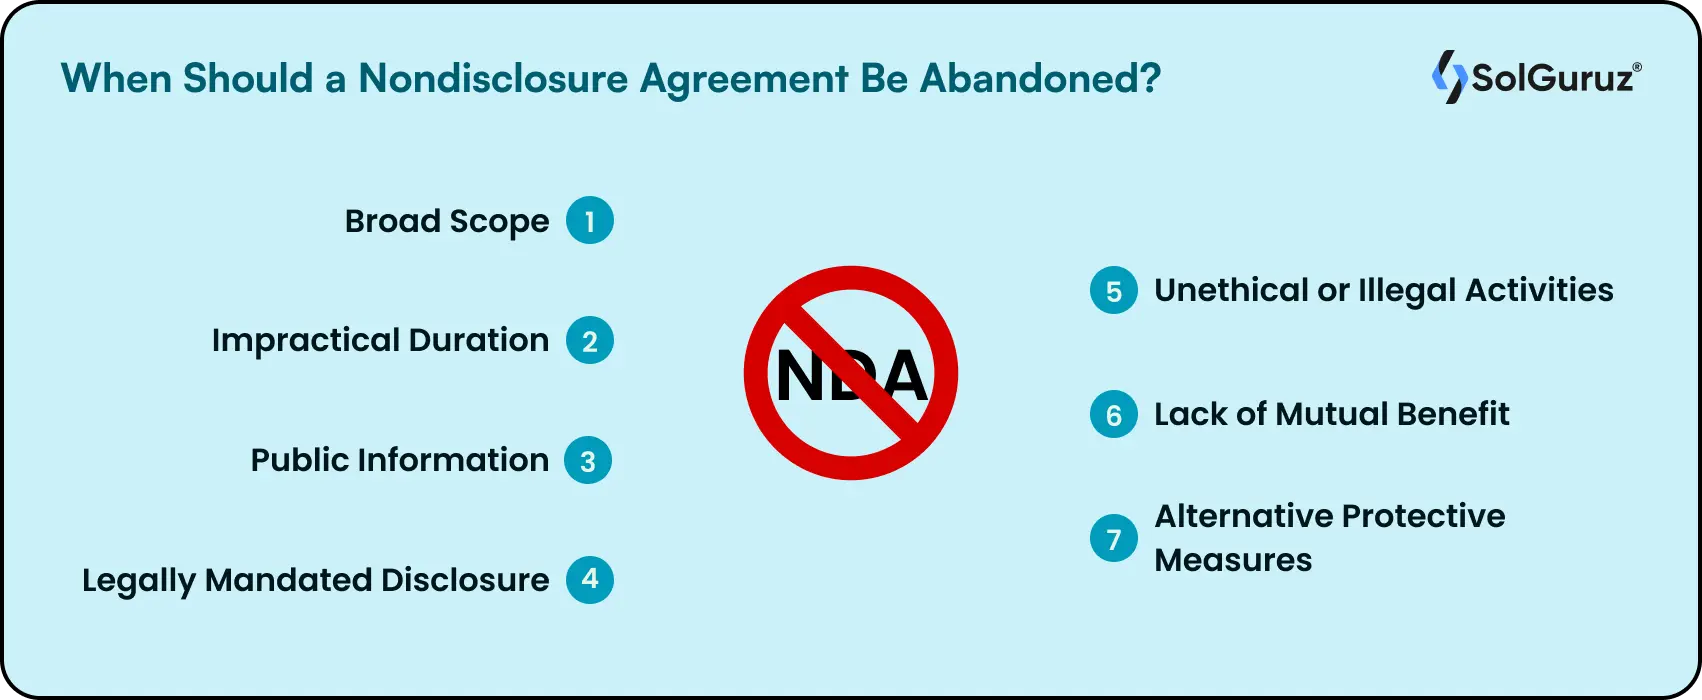 When Should a Nondisclosure Agreement Be Abandoned